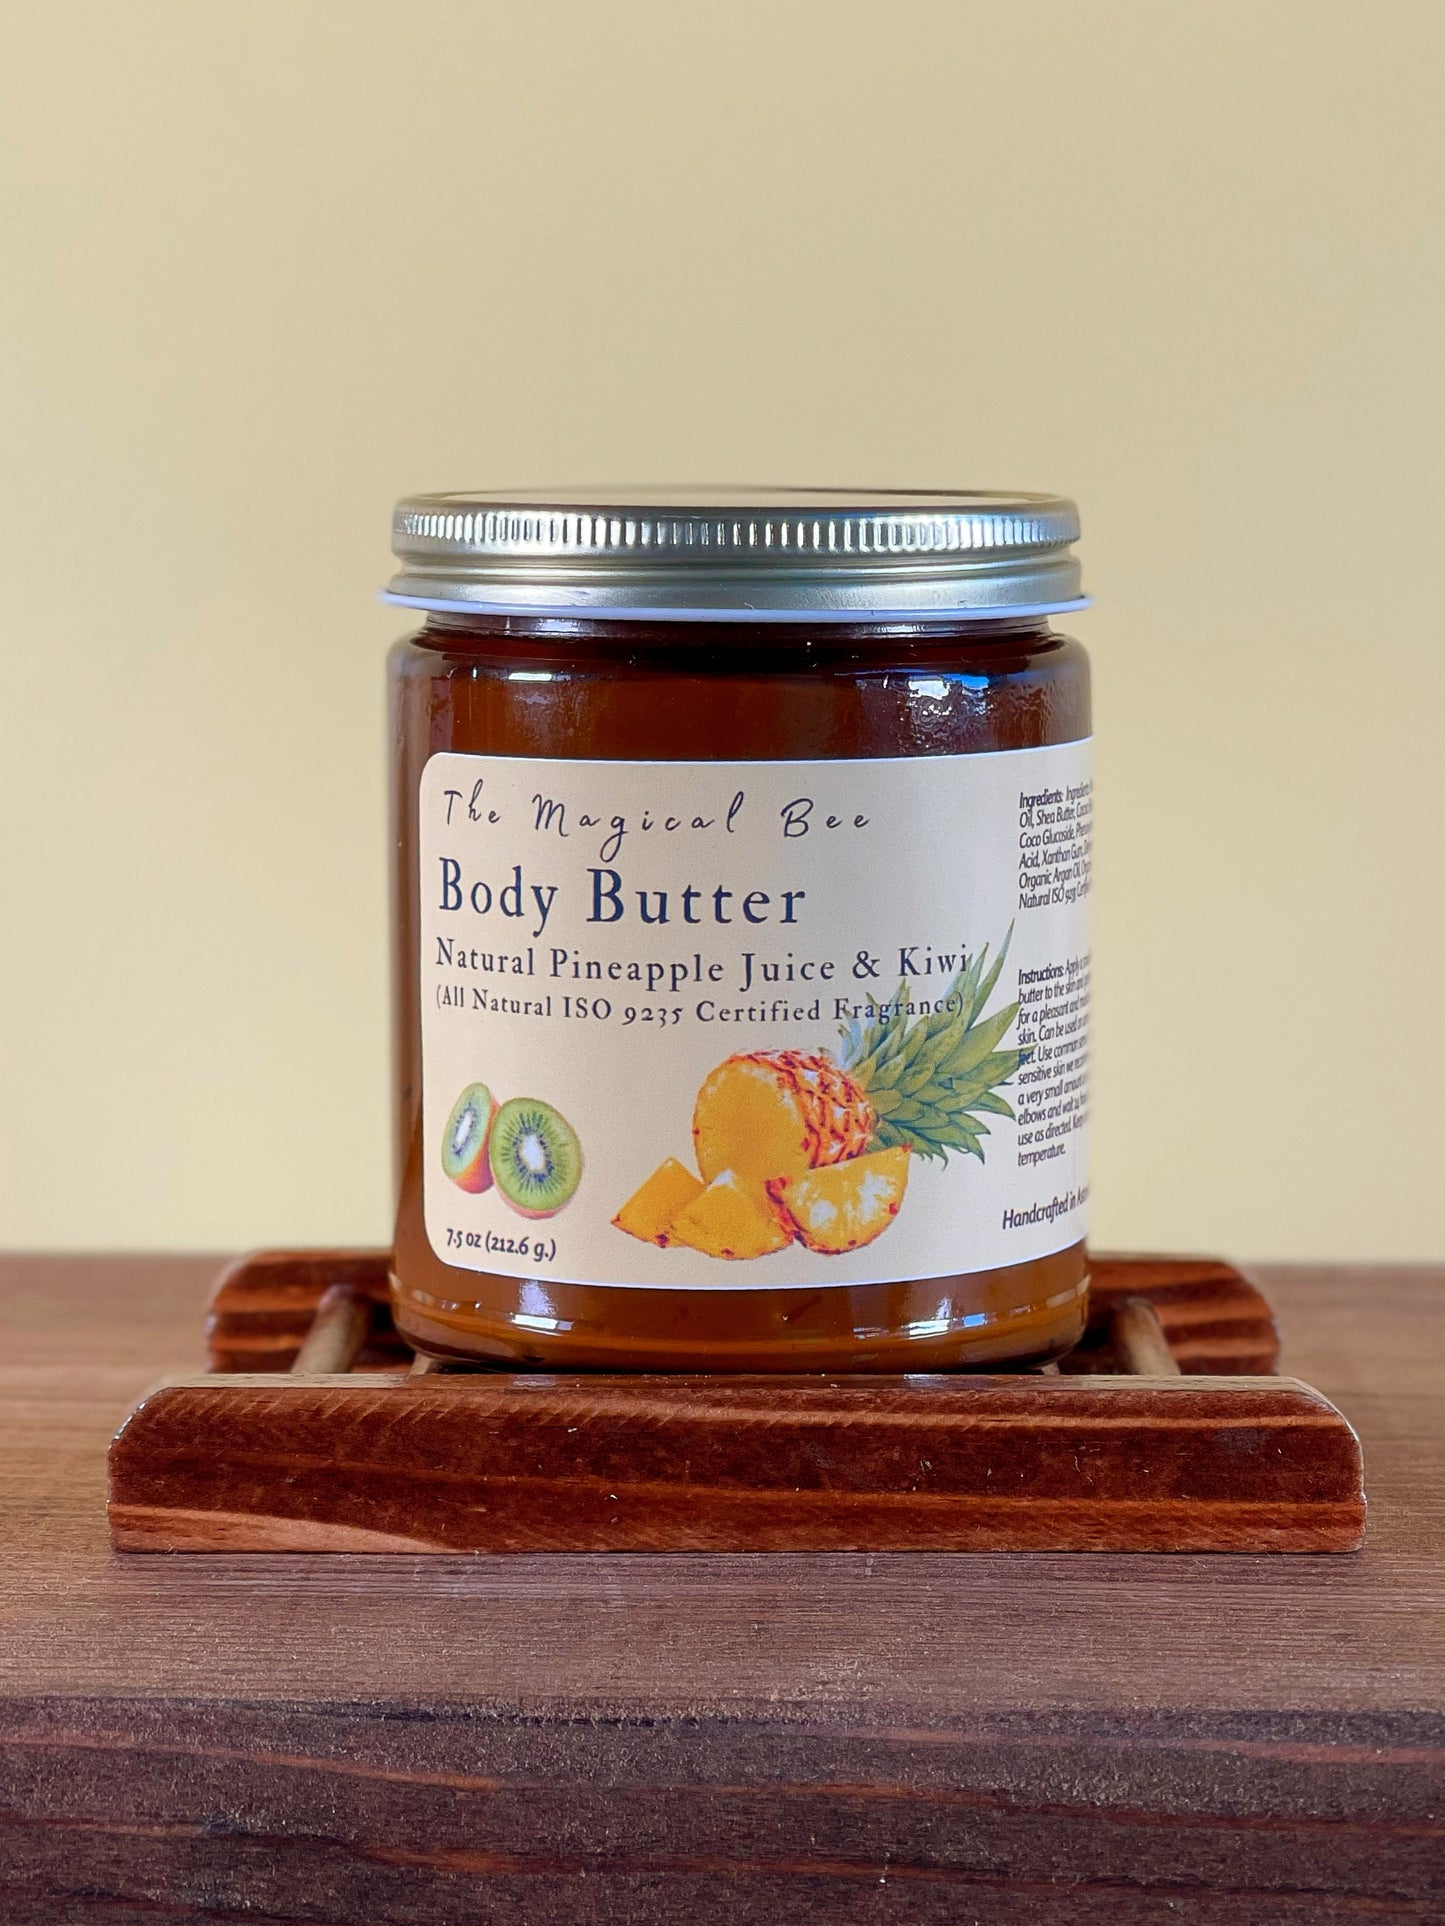 Natural Pineapple Juice & Kiwi Body Butter (All Natural ISO 9235 certified fragrance)